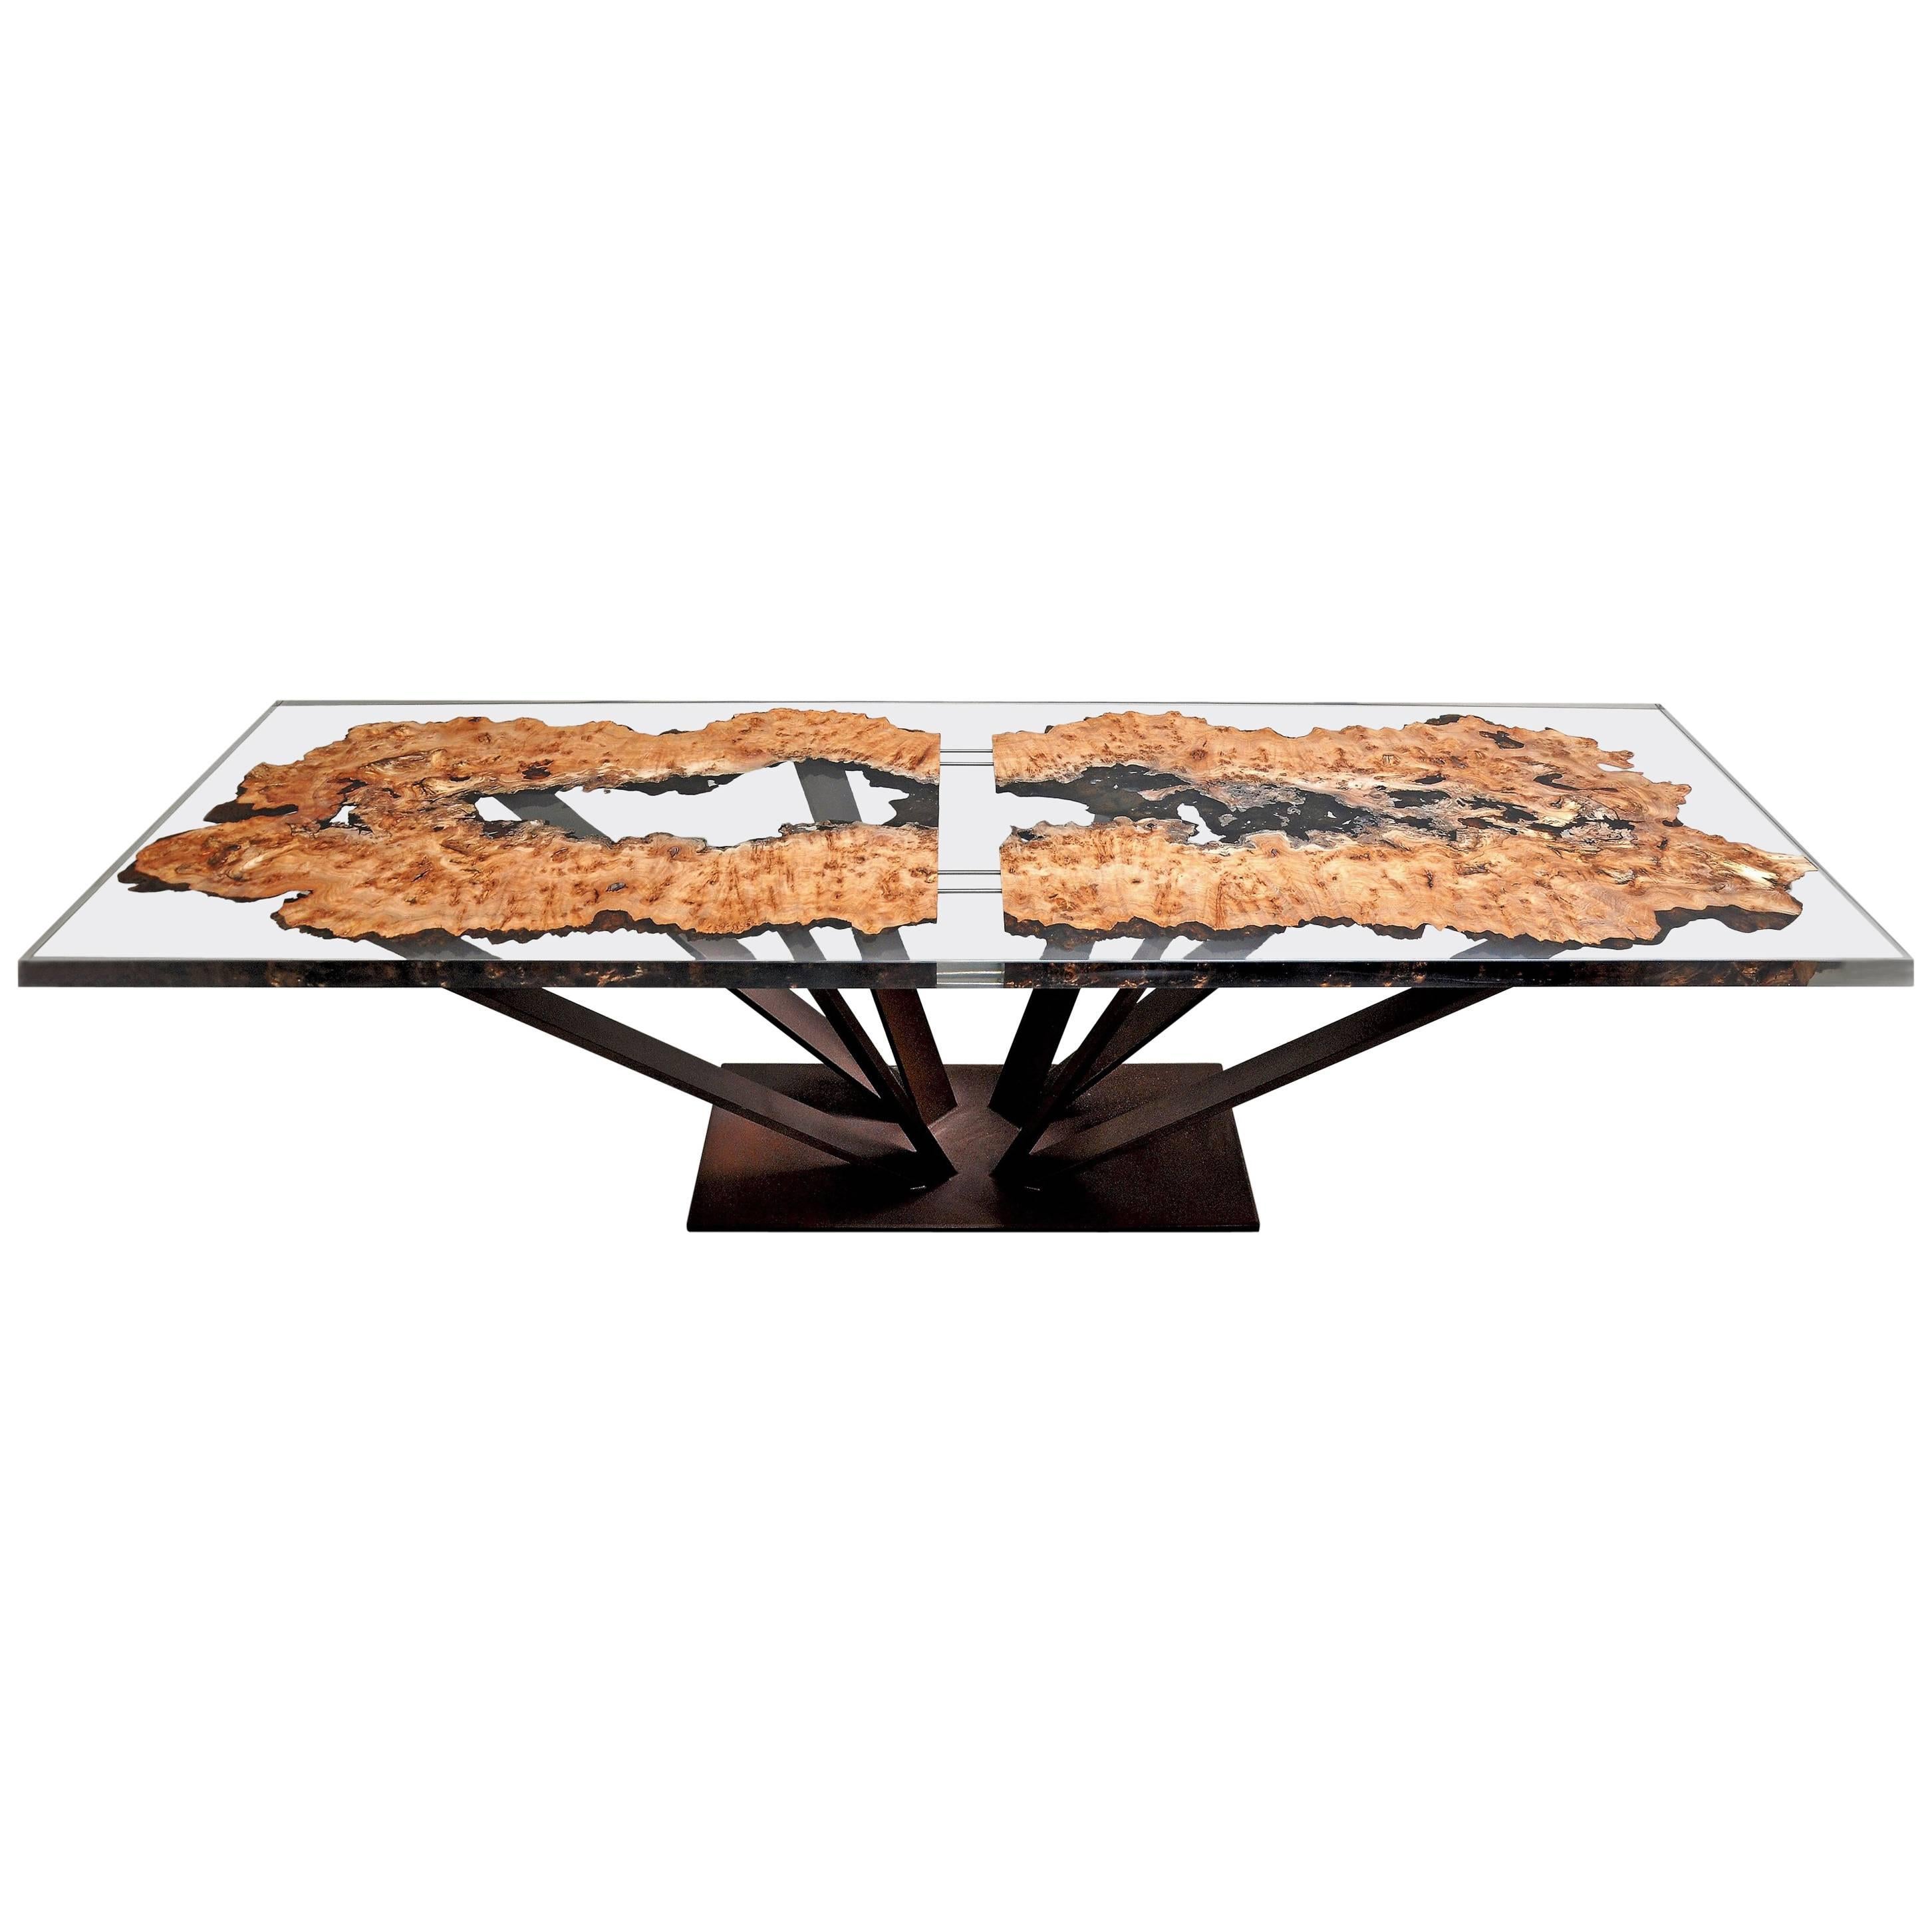 Elm Wood and Resin Dining or Conference Table